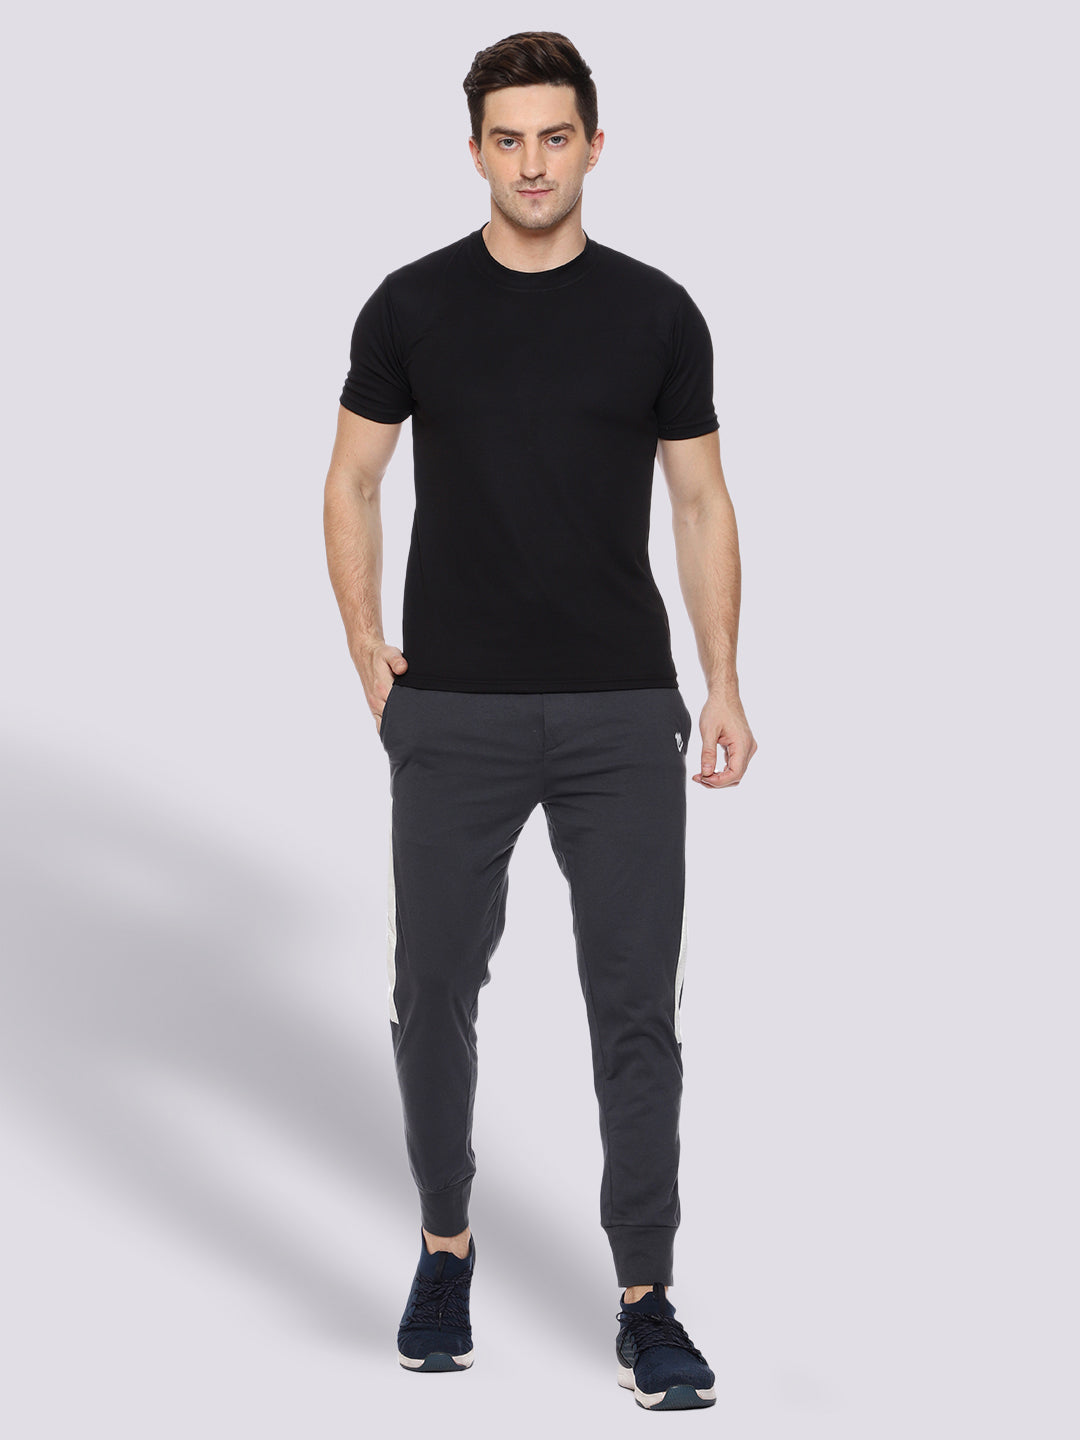 Charcoal Grey Close Bottom Cotton Track Pant for Men